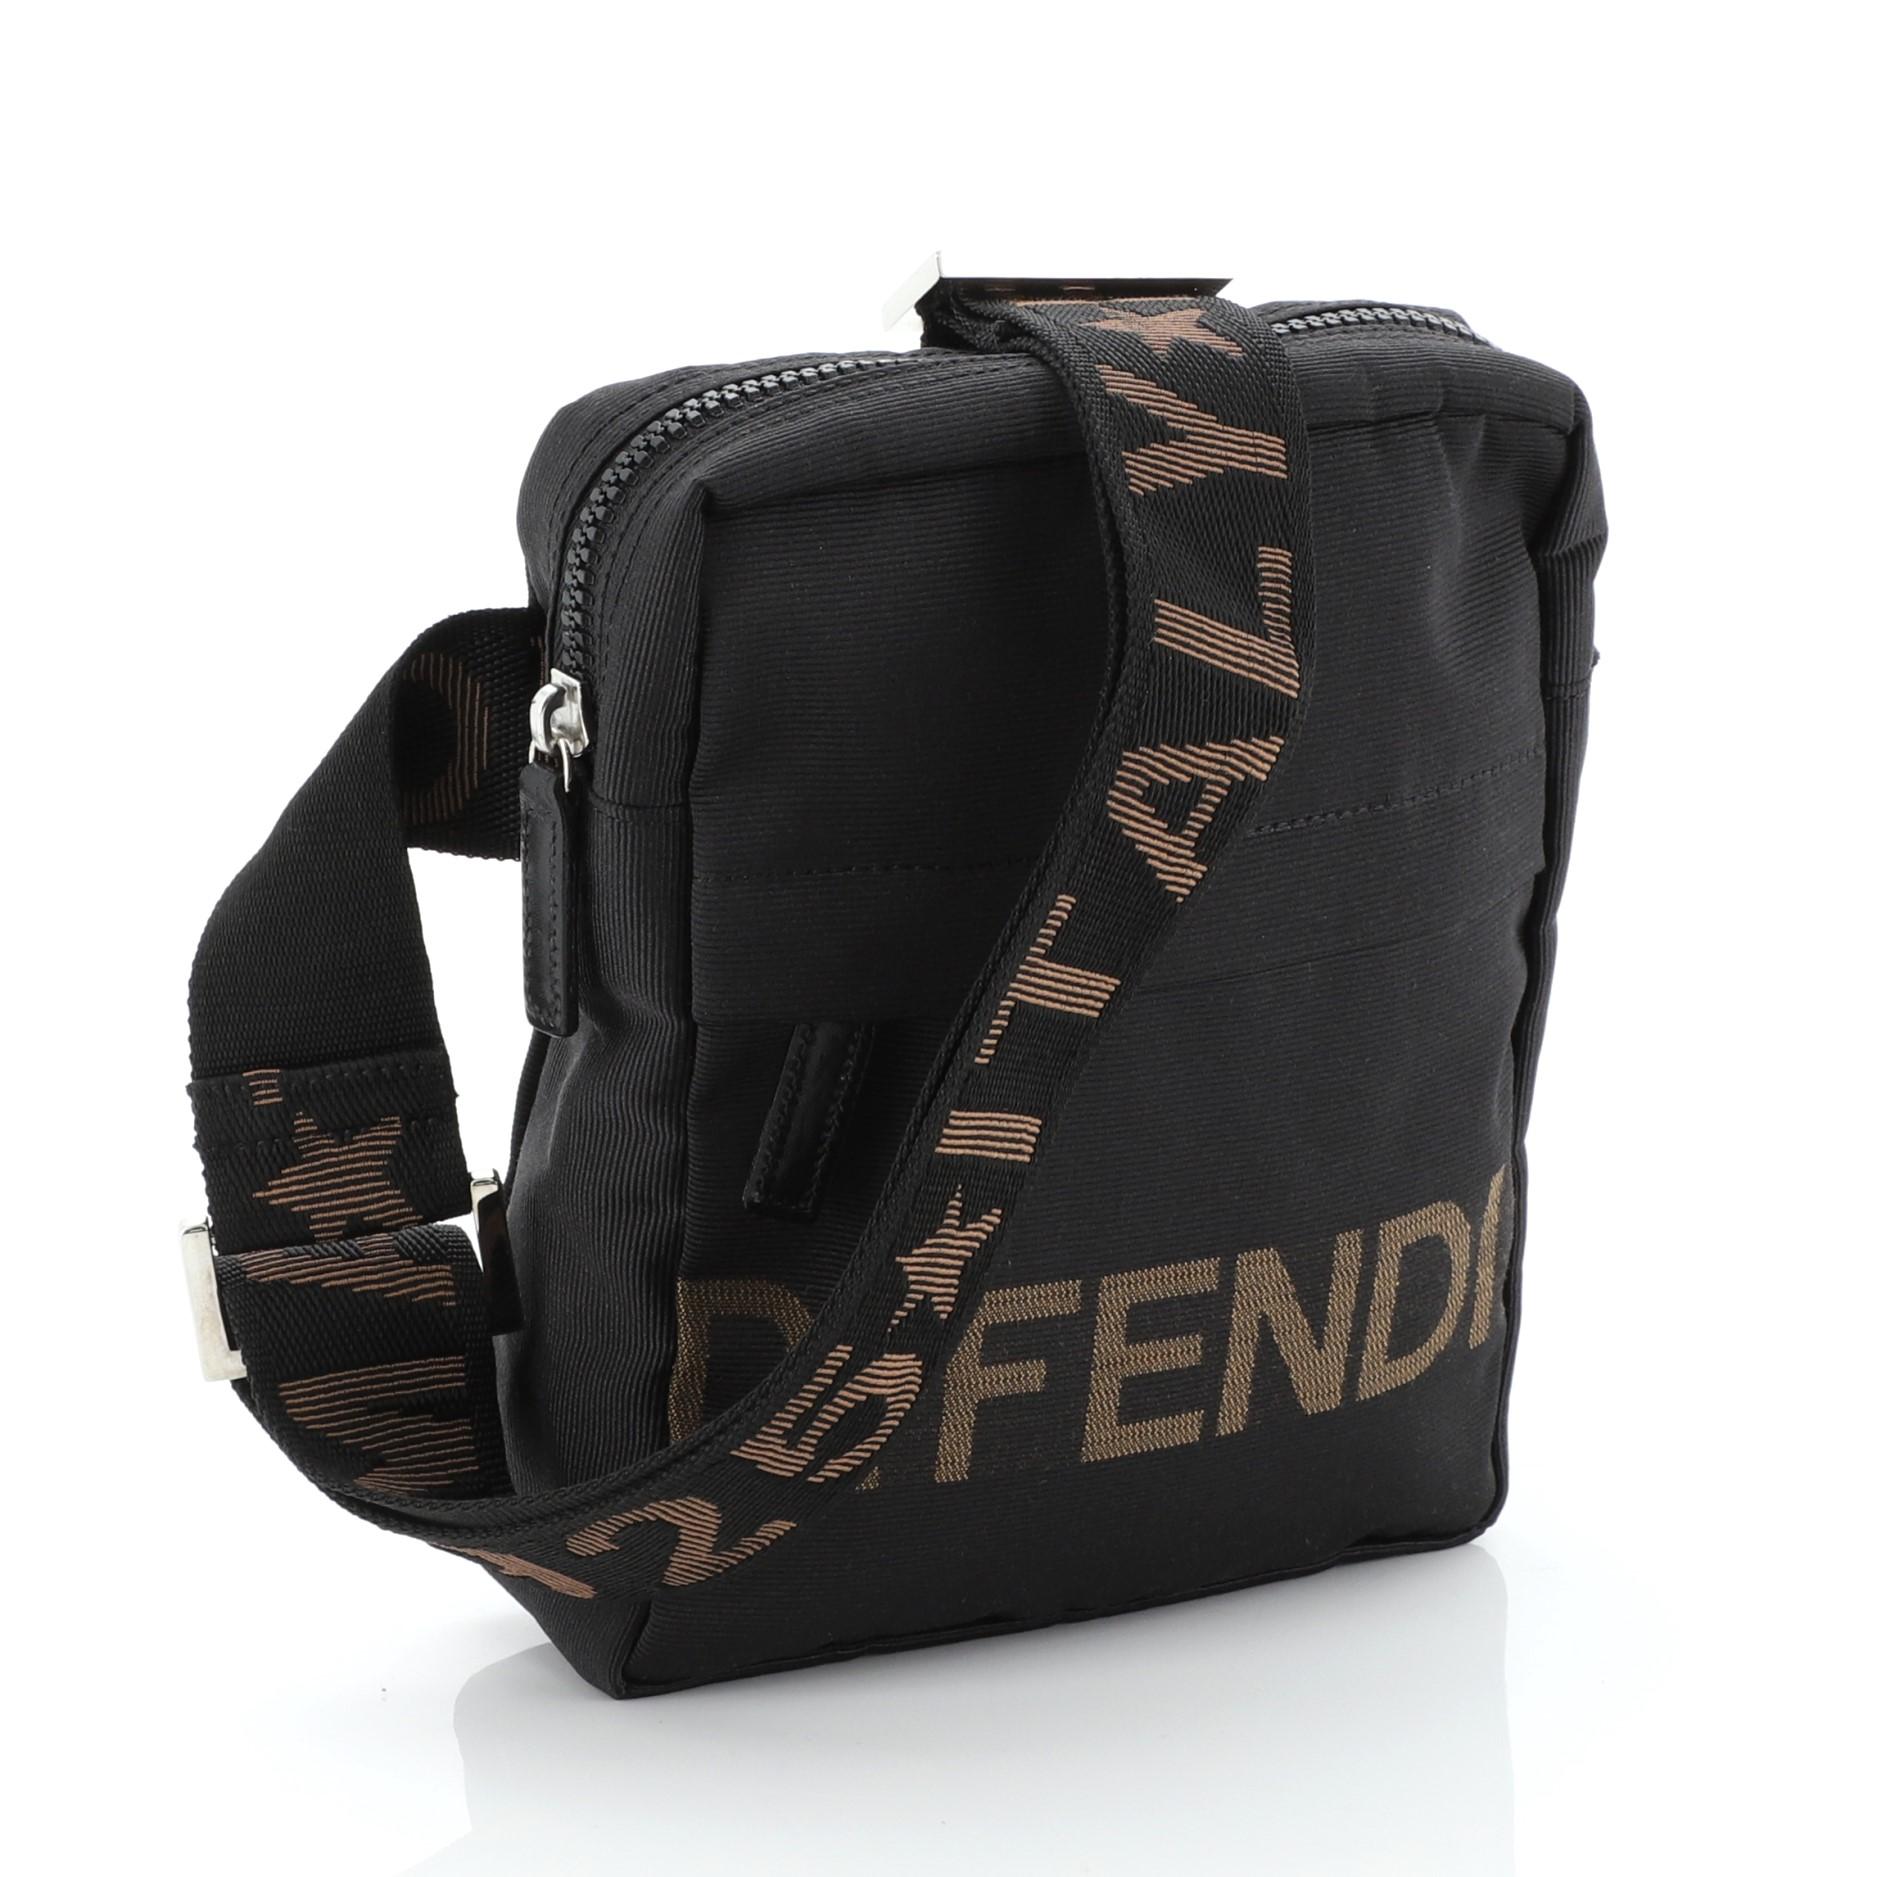 This Fendi Vintage Logo Messenger Bag Nylon Small, crafted from black zucca canvas, features the iconic Vintage Fendi logo front zip pocket, and silver-tone hardware. Its flap opens to a black fabric interior.

Condition: Excellent. Minimal wear in